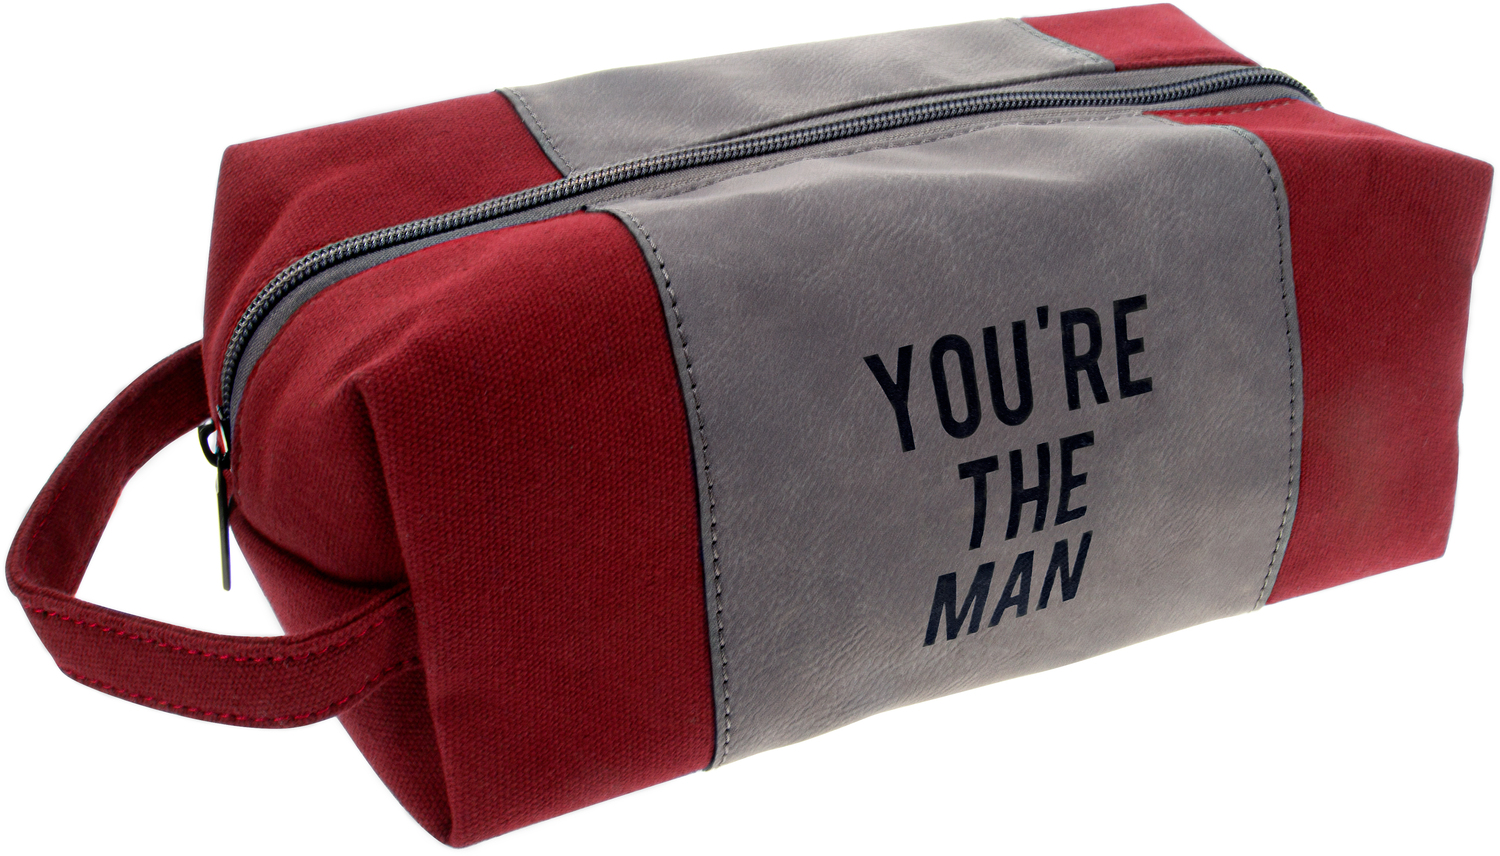 You're the Man by Man Made - You're the Man - Canvas Toiletry Bag